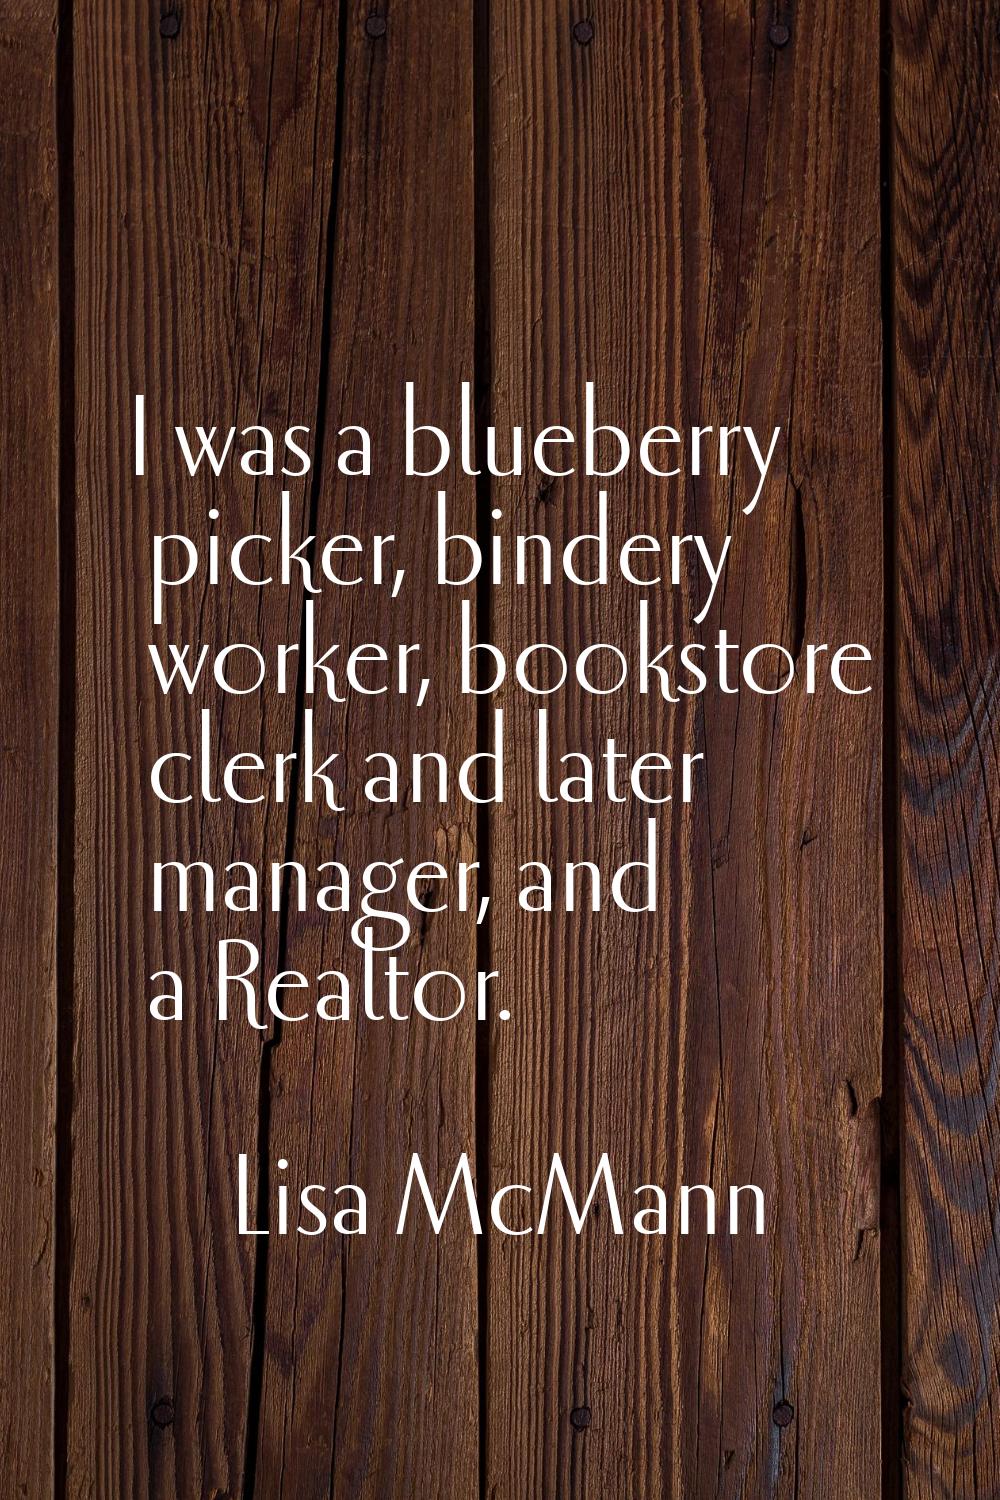 I was a blueberry picker, bindery worker, bookstore clerk and later manager, and a Realtor.